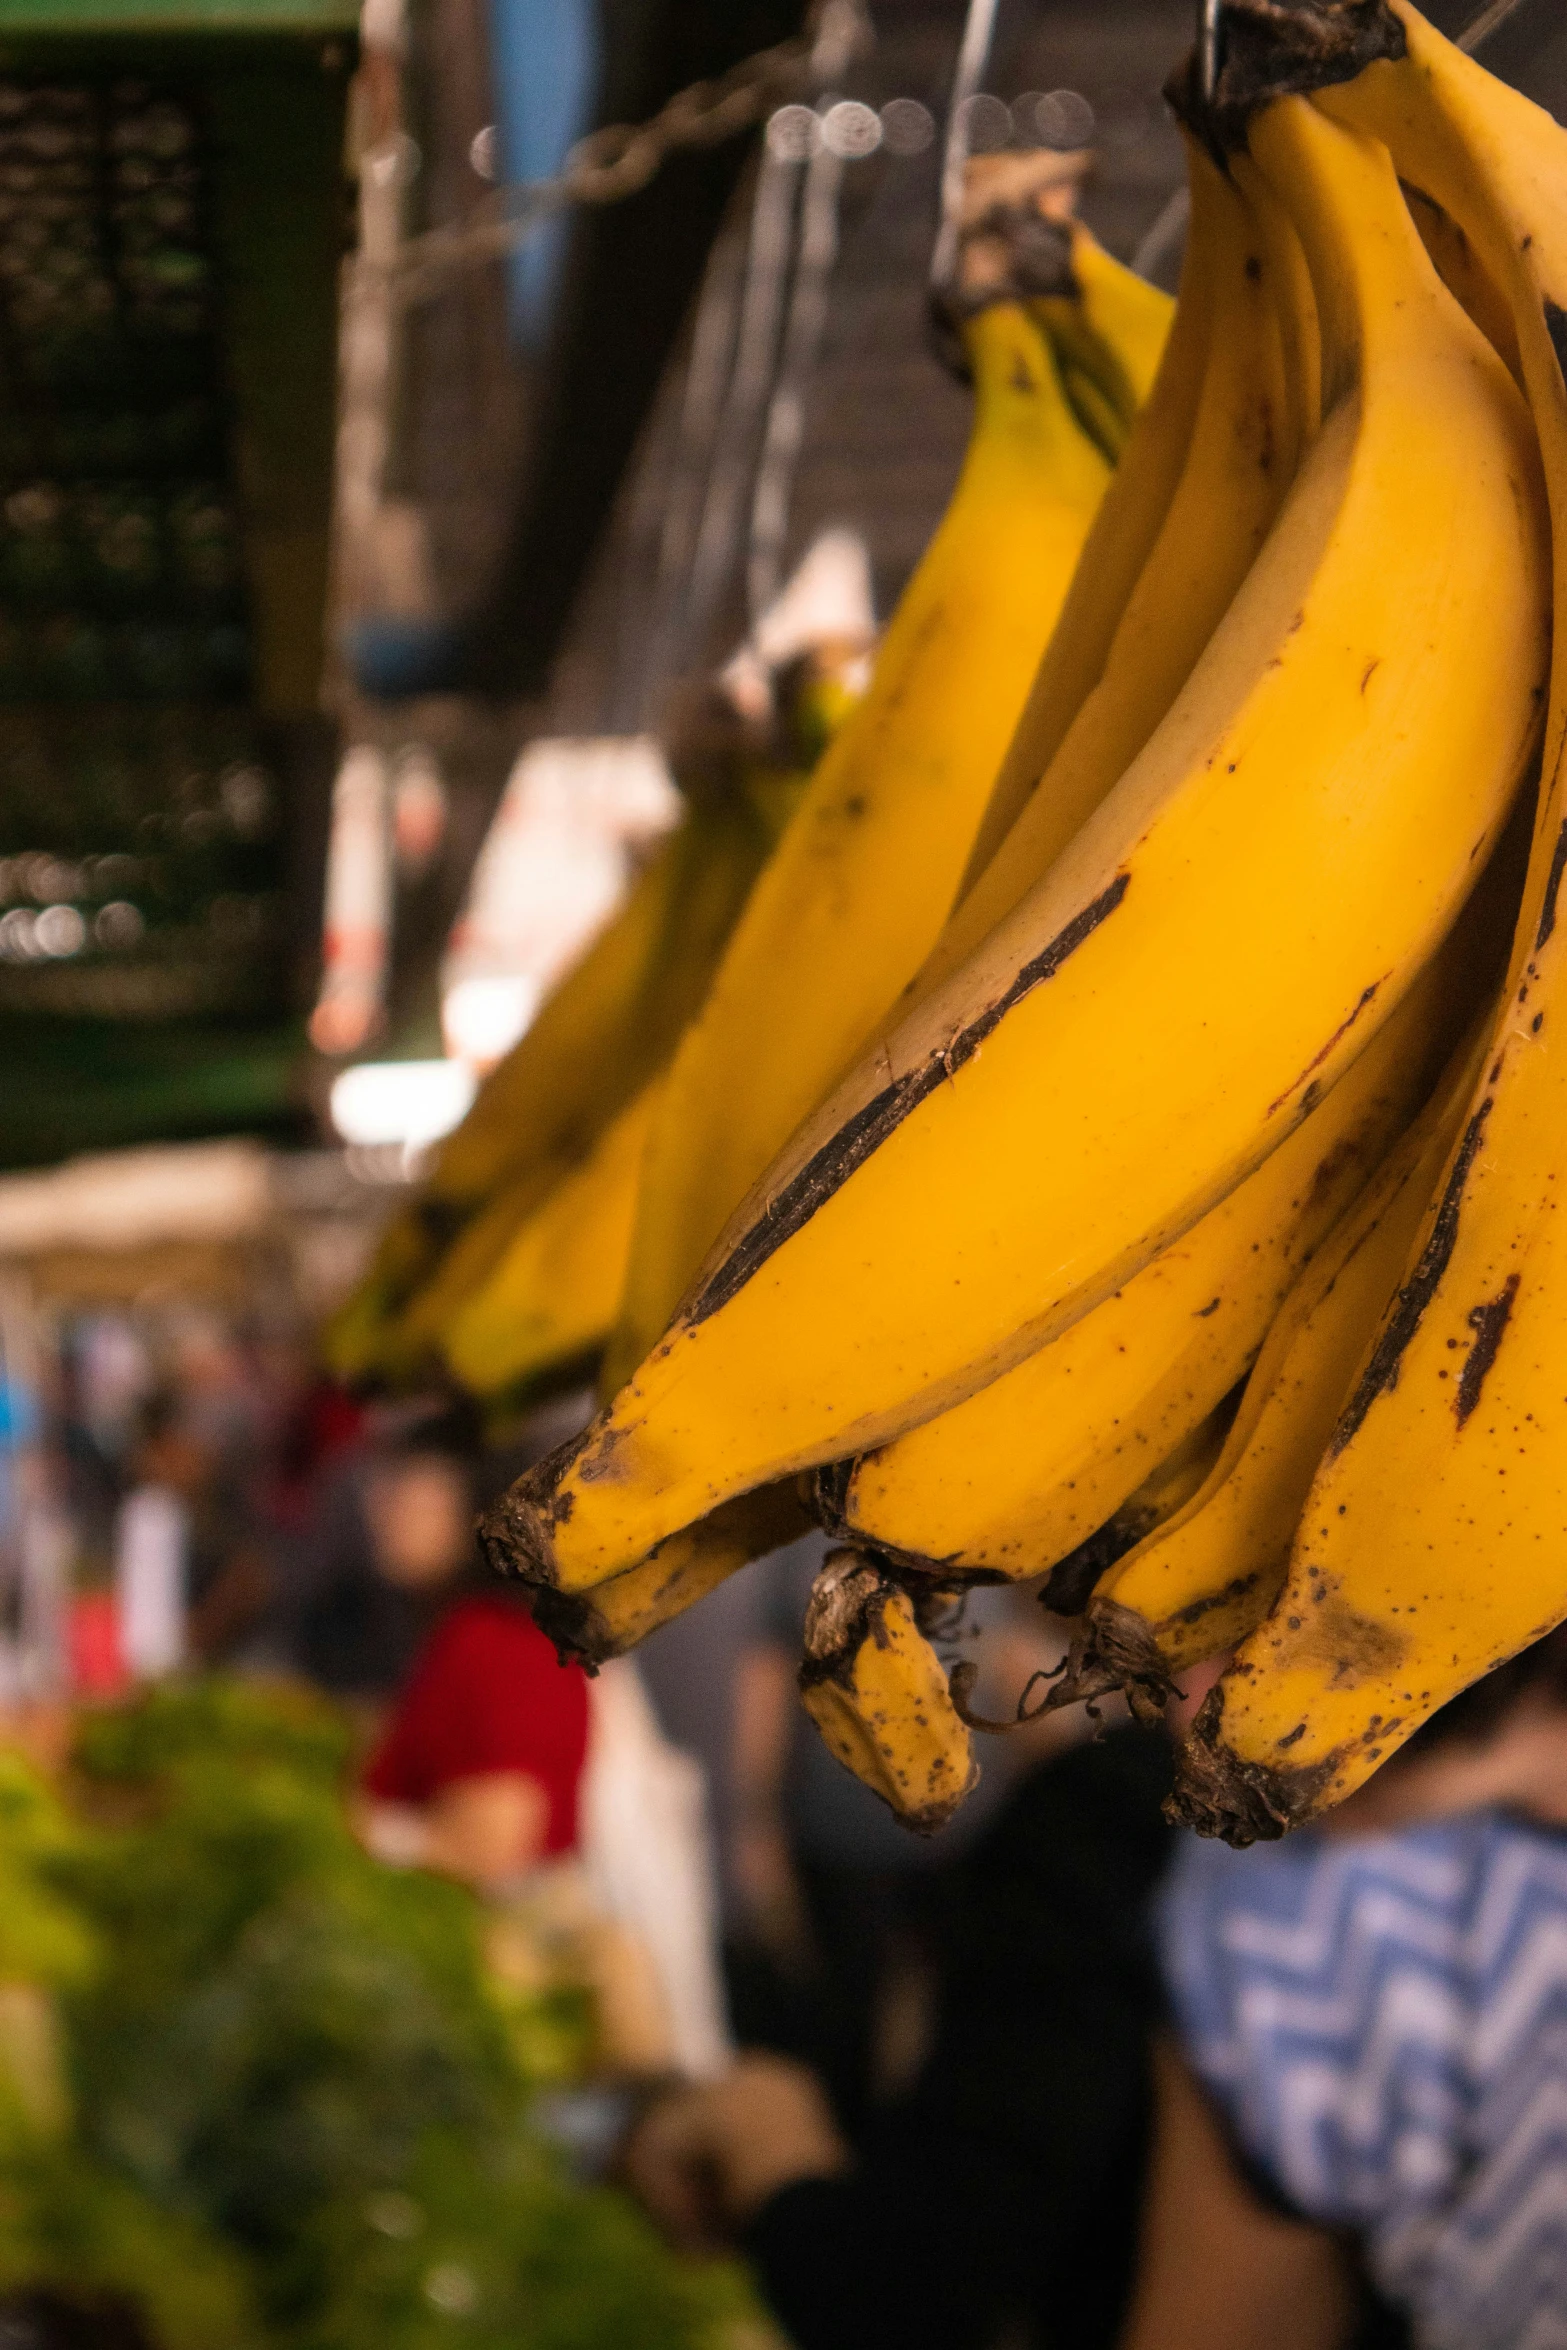 bunches of bananas hanging next to each other in a market